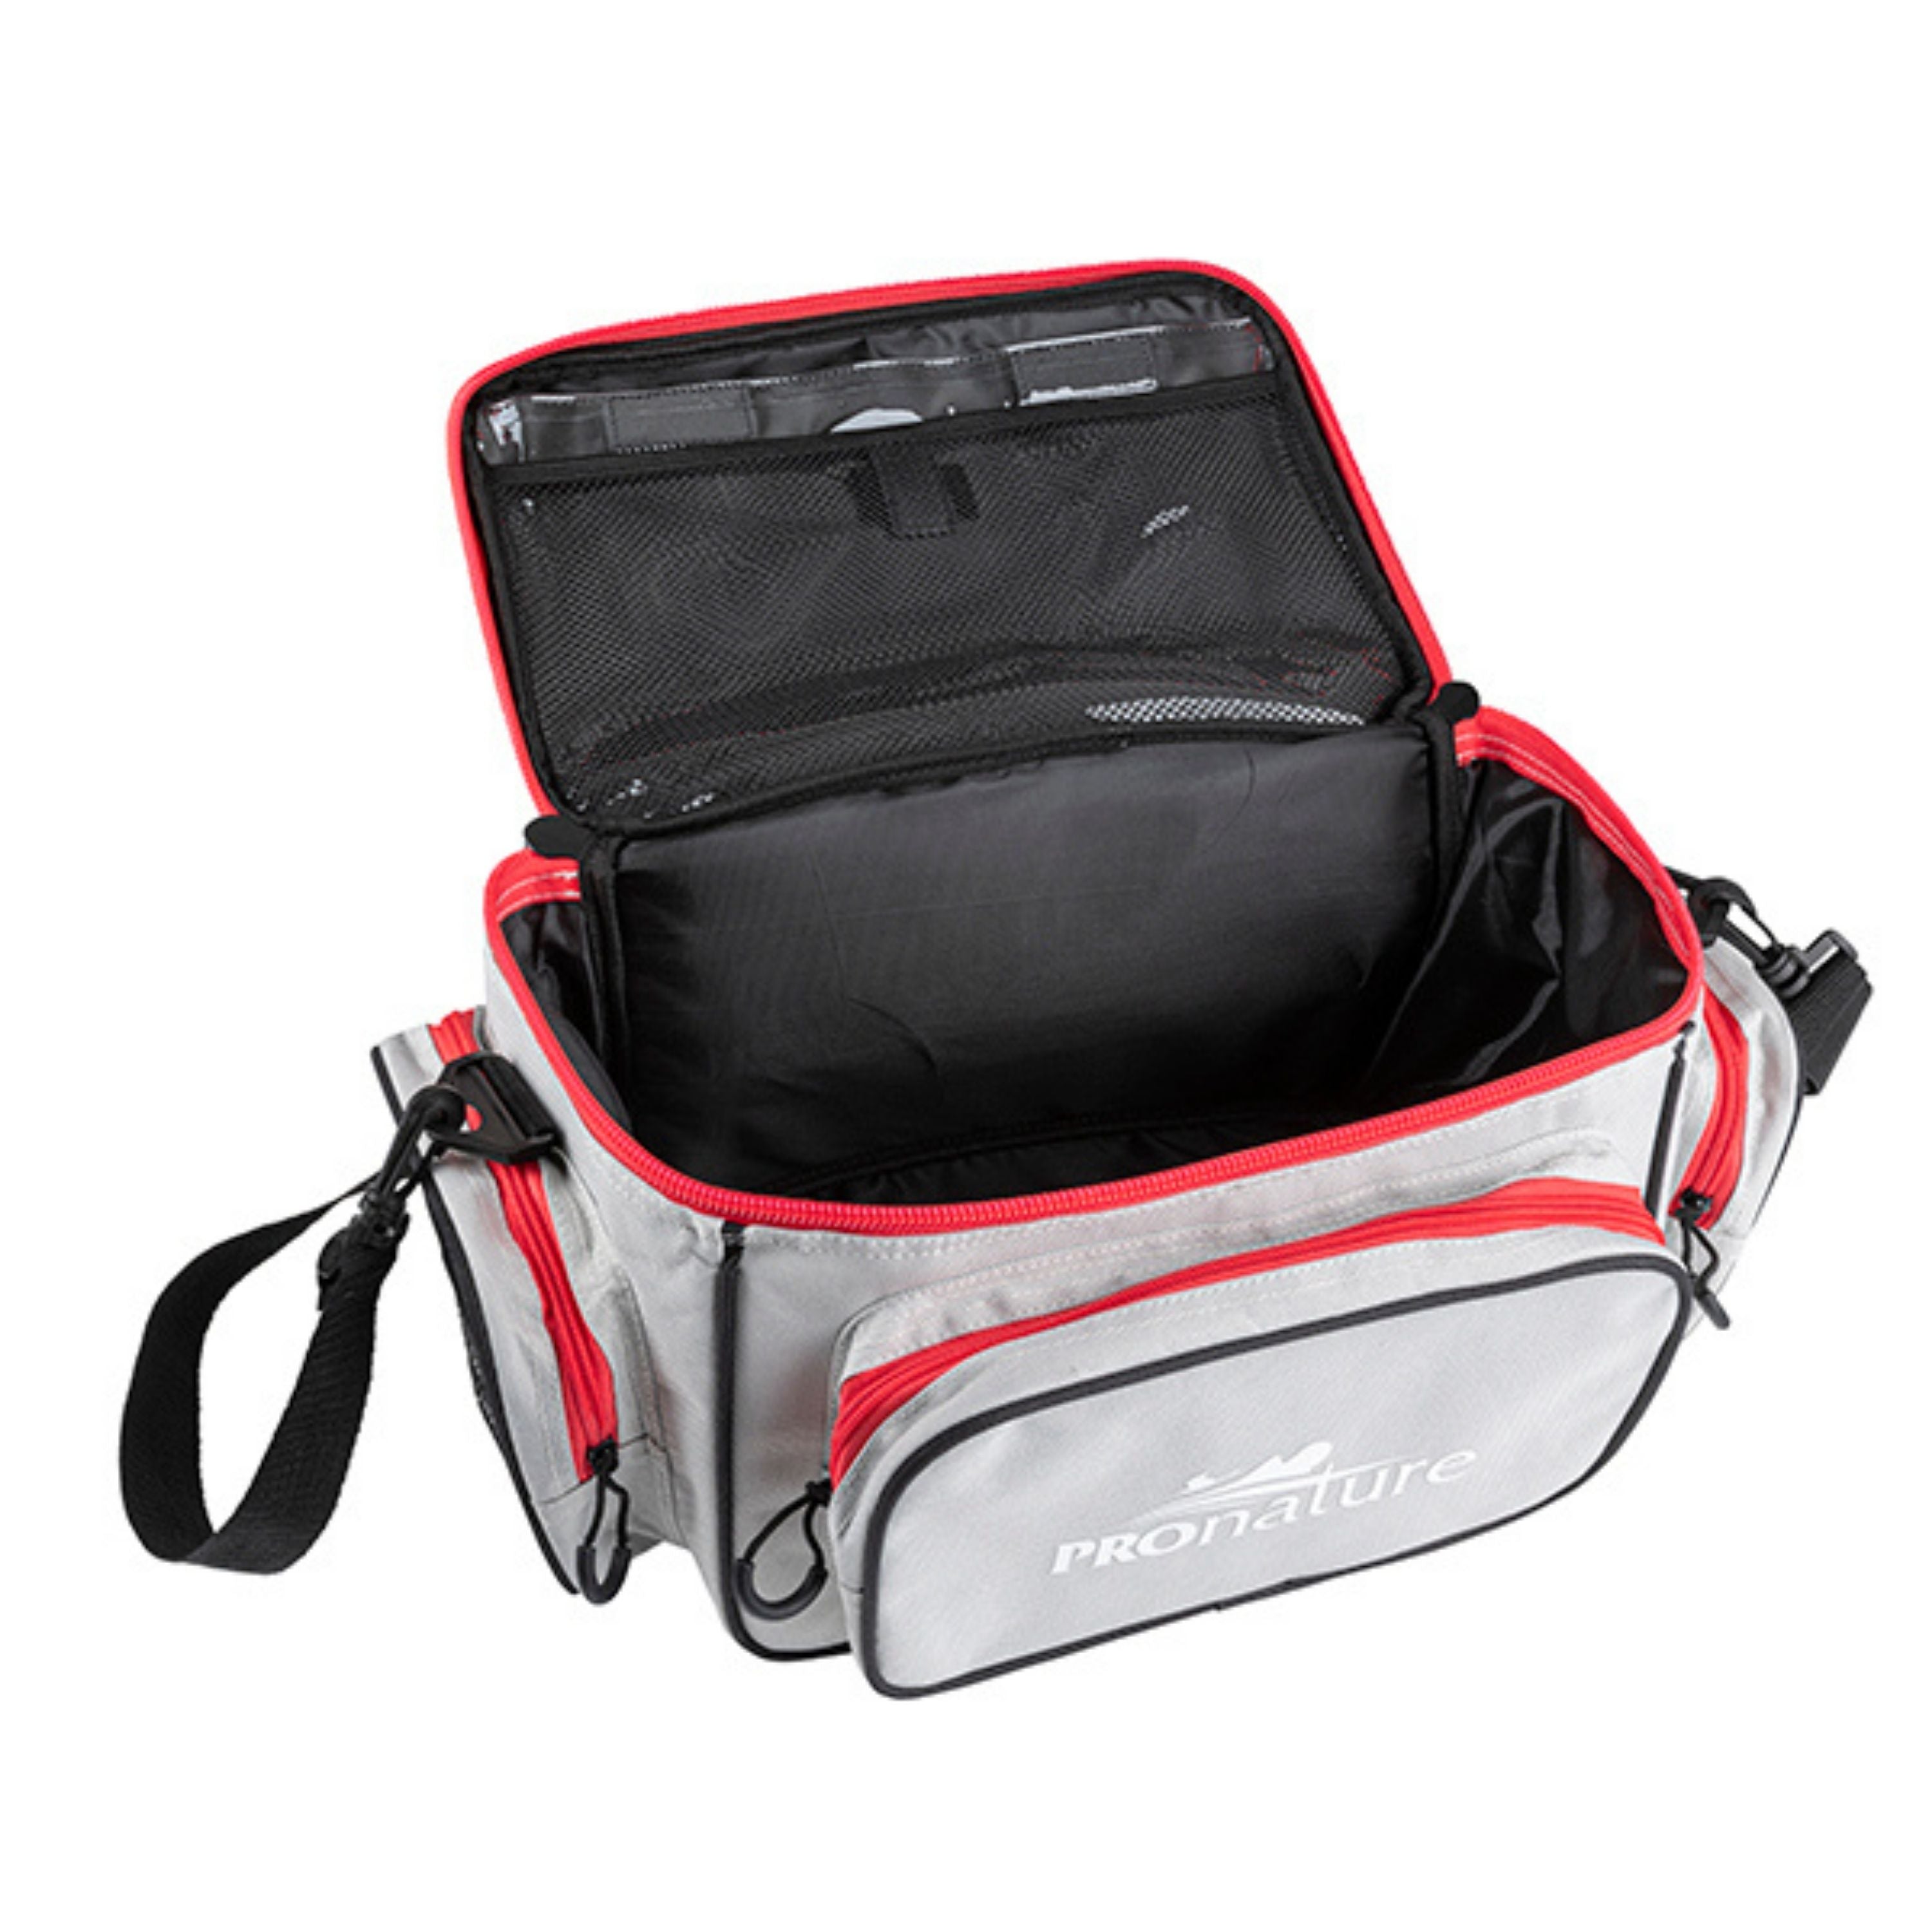 Big format fishing bag with tackle boxes — Groupe Pronature